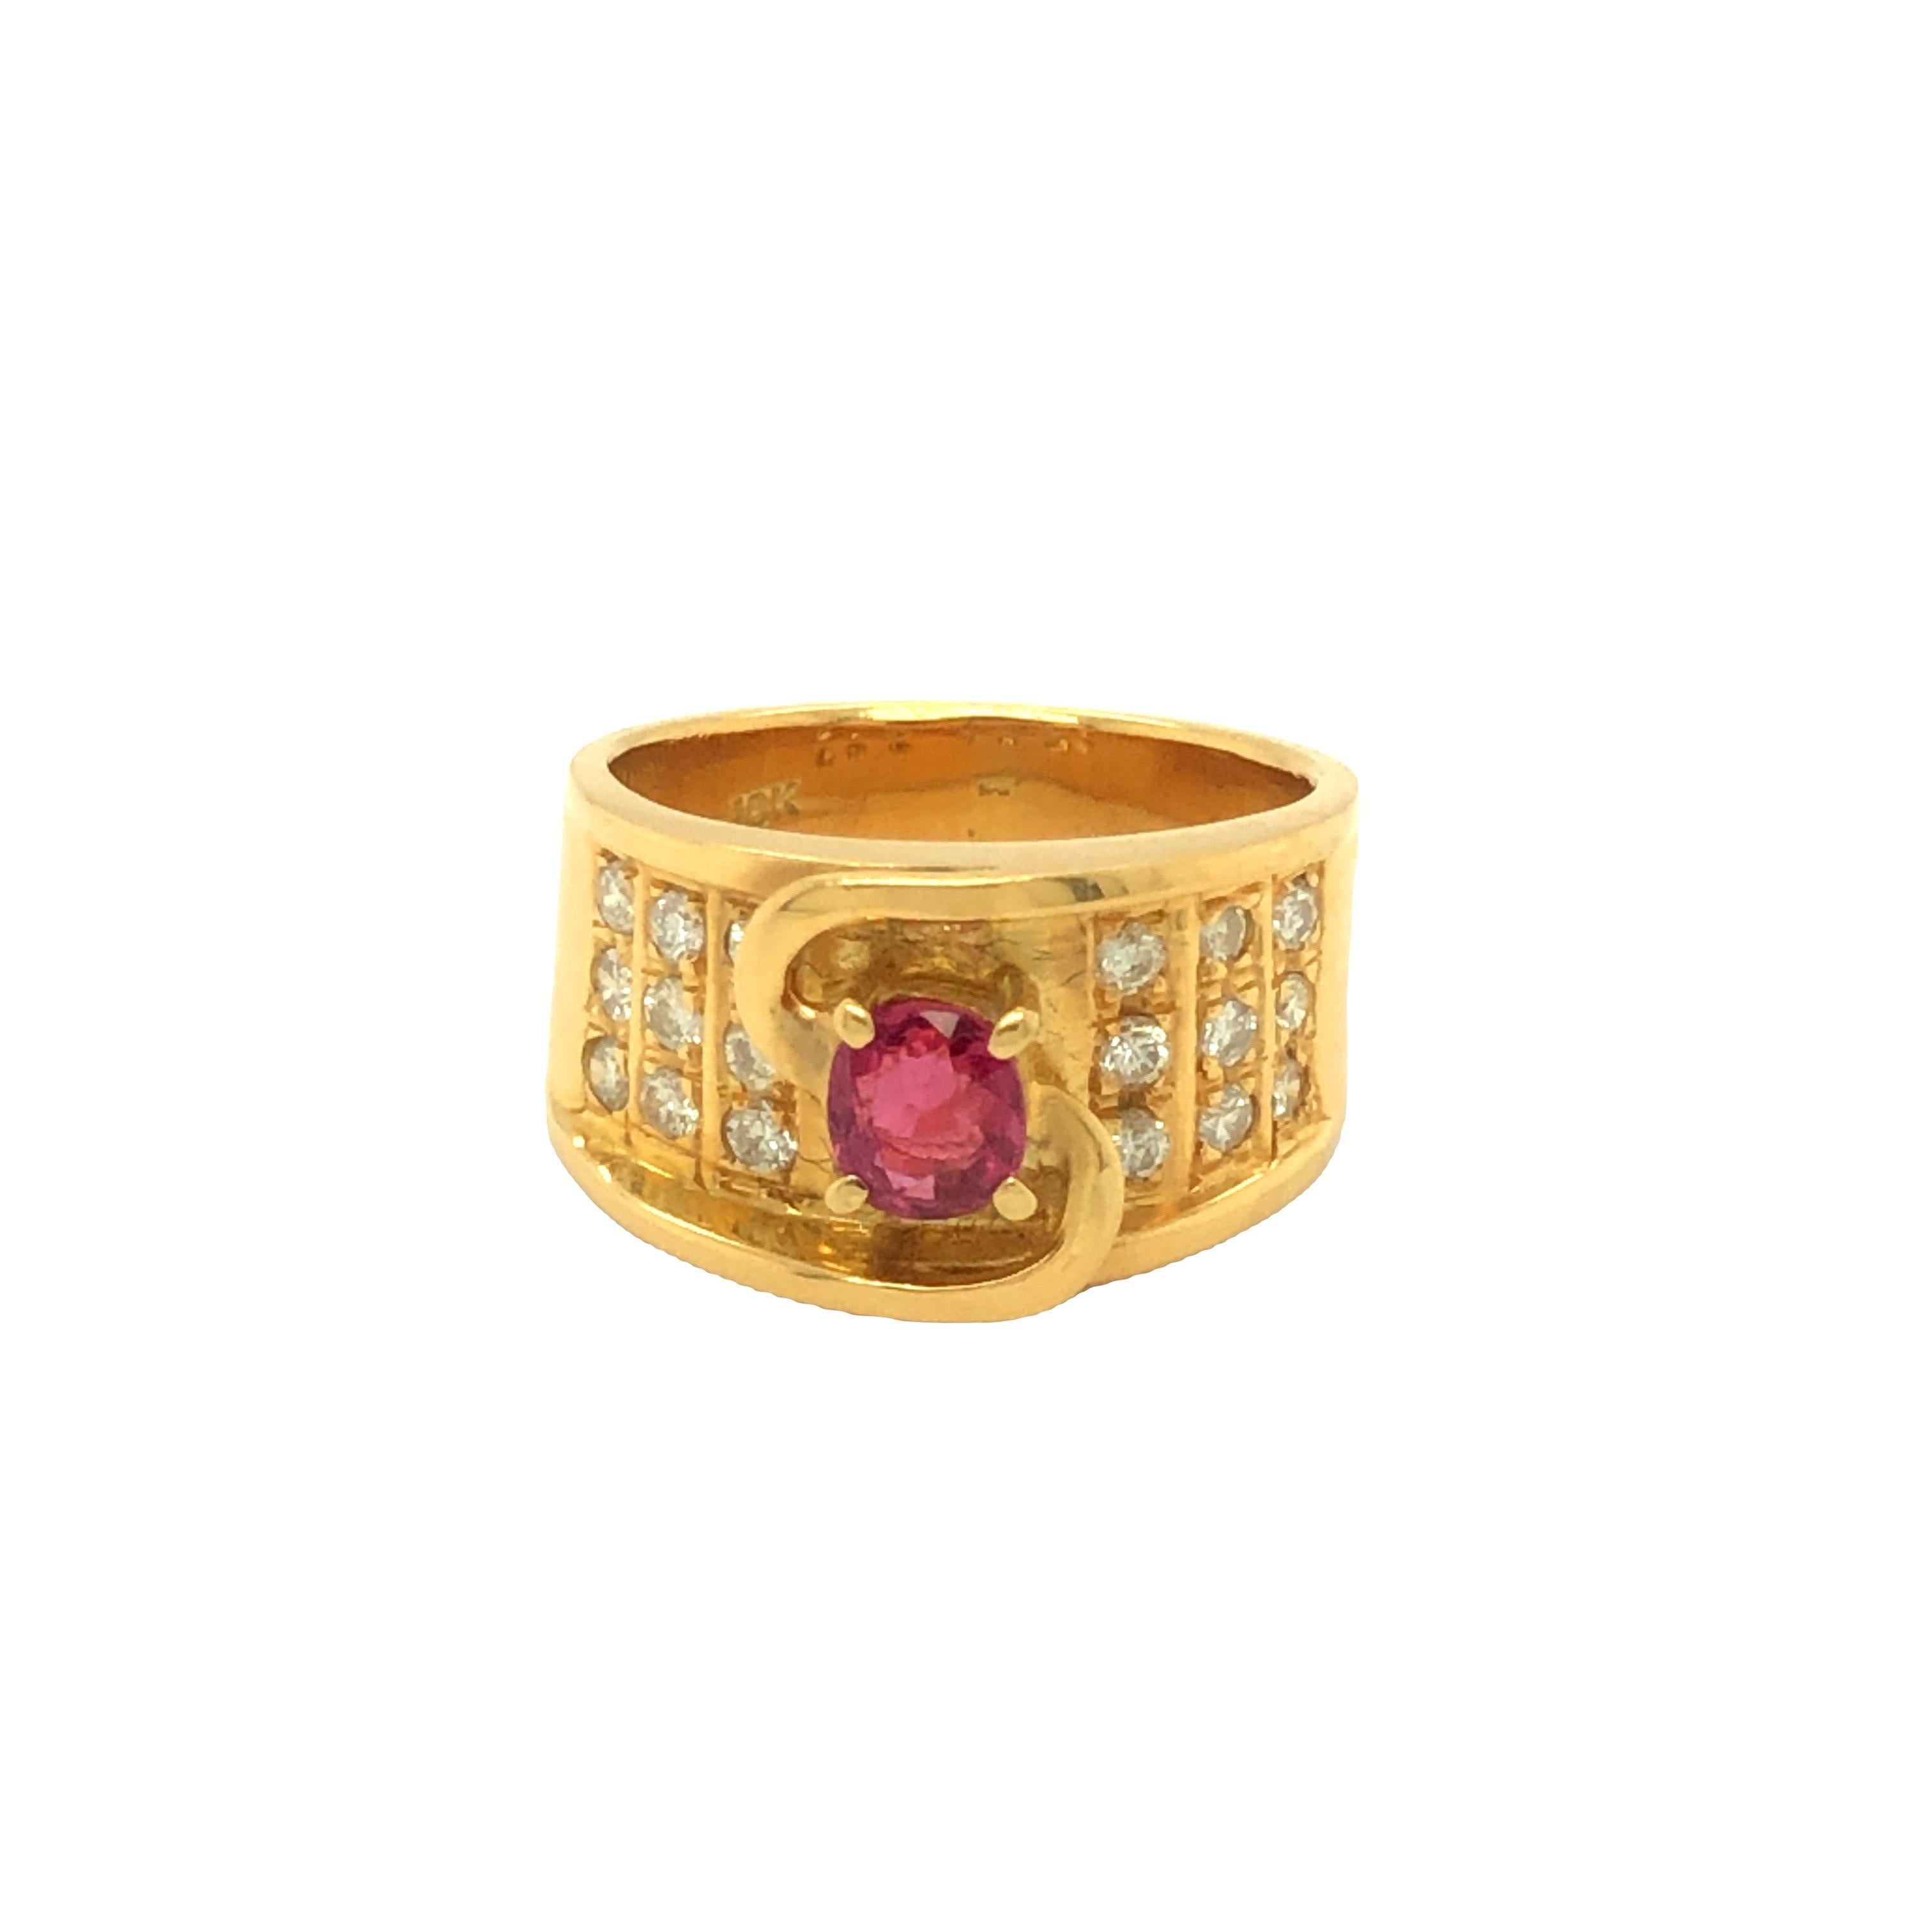 The retro ring features a 0.45 carat oval shaped ruby with a vivid red color. It is accented by 0.40 carat total weight of round brilliant cut diamonds. Artistically crafted in 18k yellow gold and ready to be worn. Currently in size 3.75 and can be